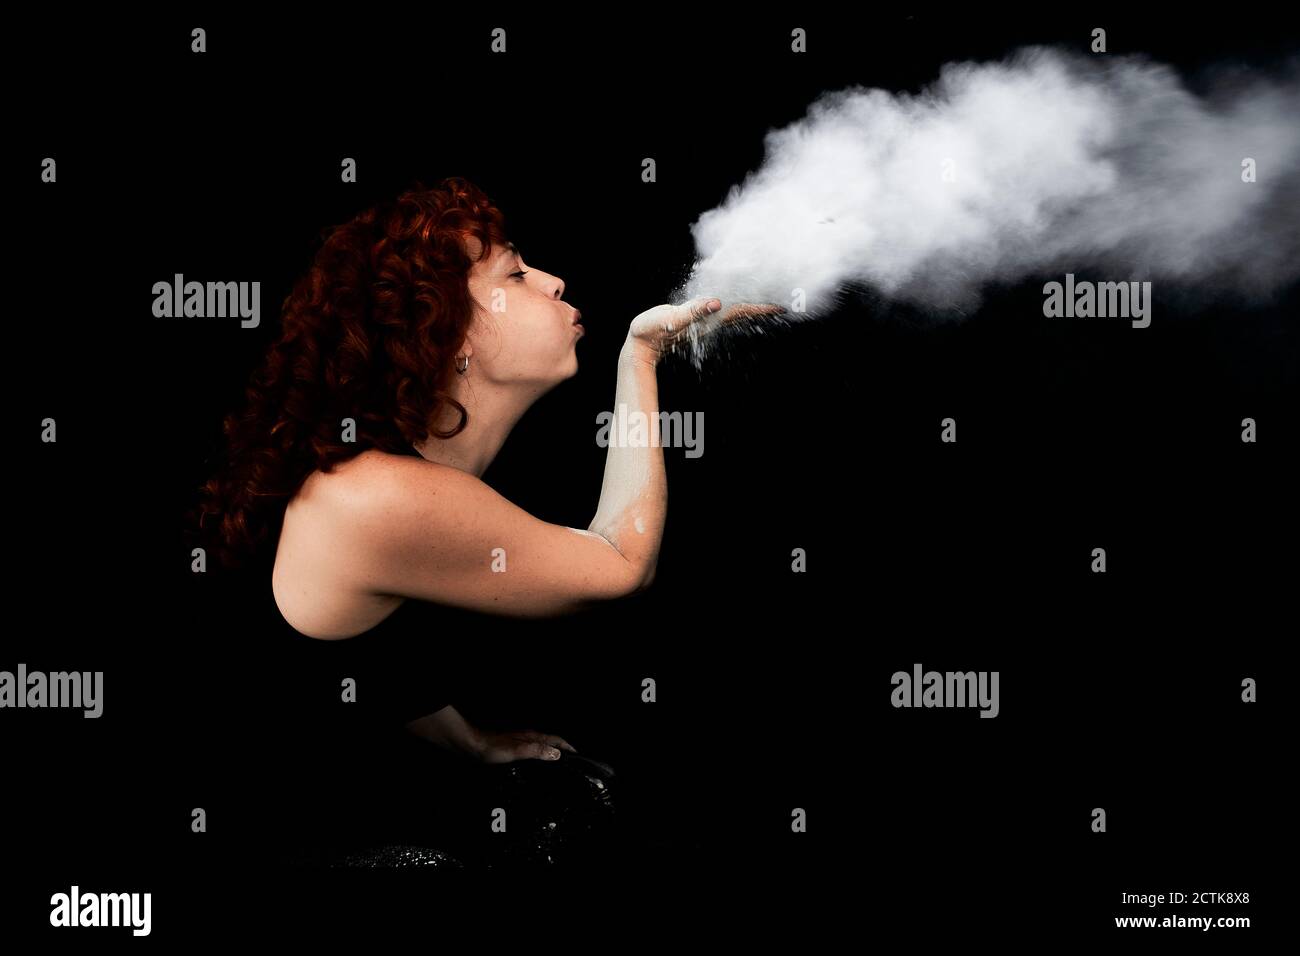 Woman blowing white dust while standing against black background Stock Photo